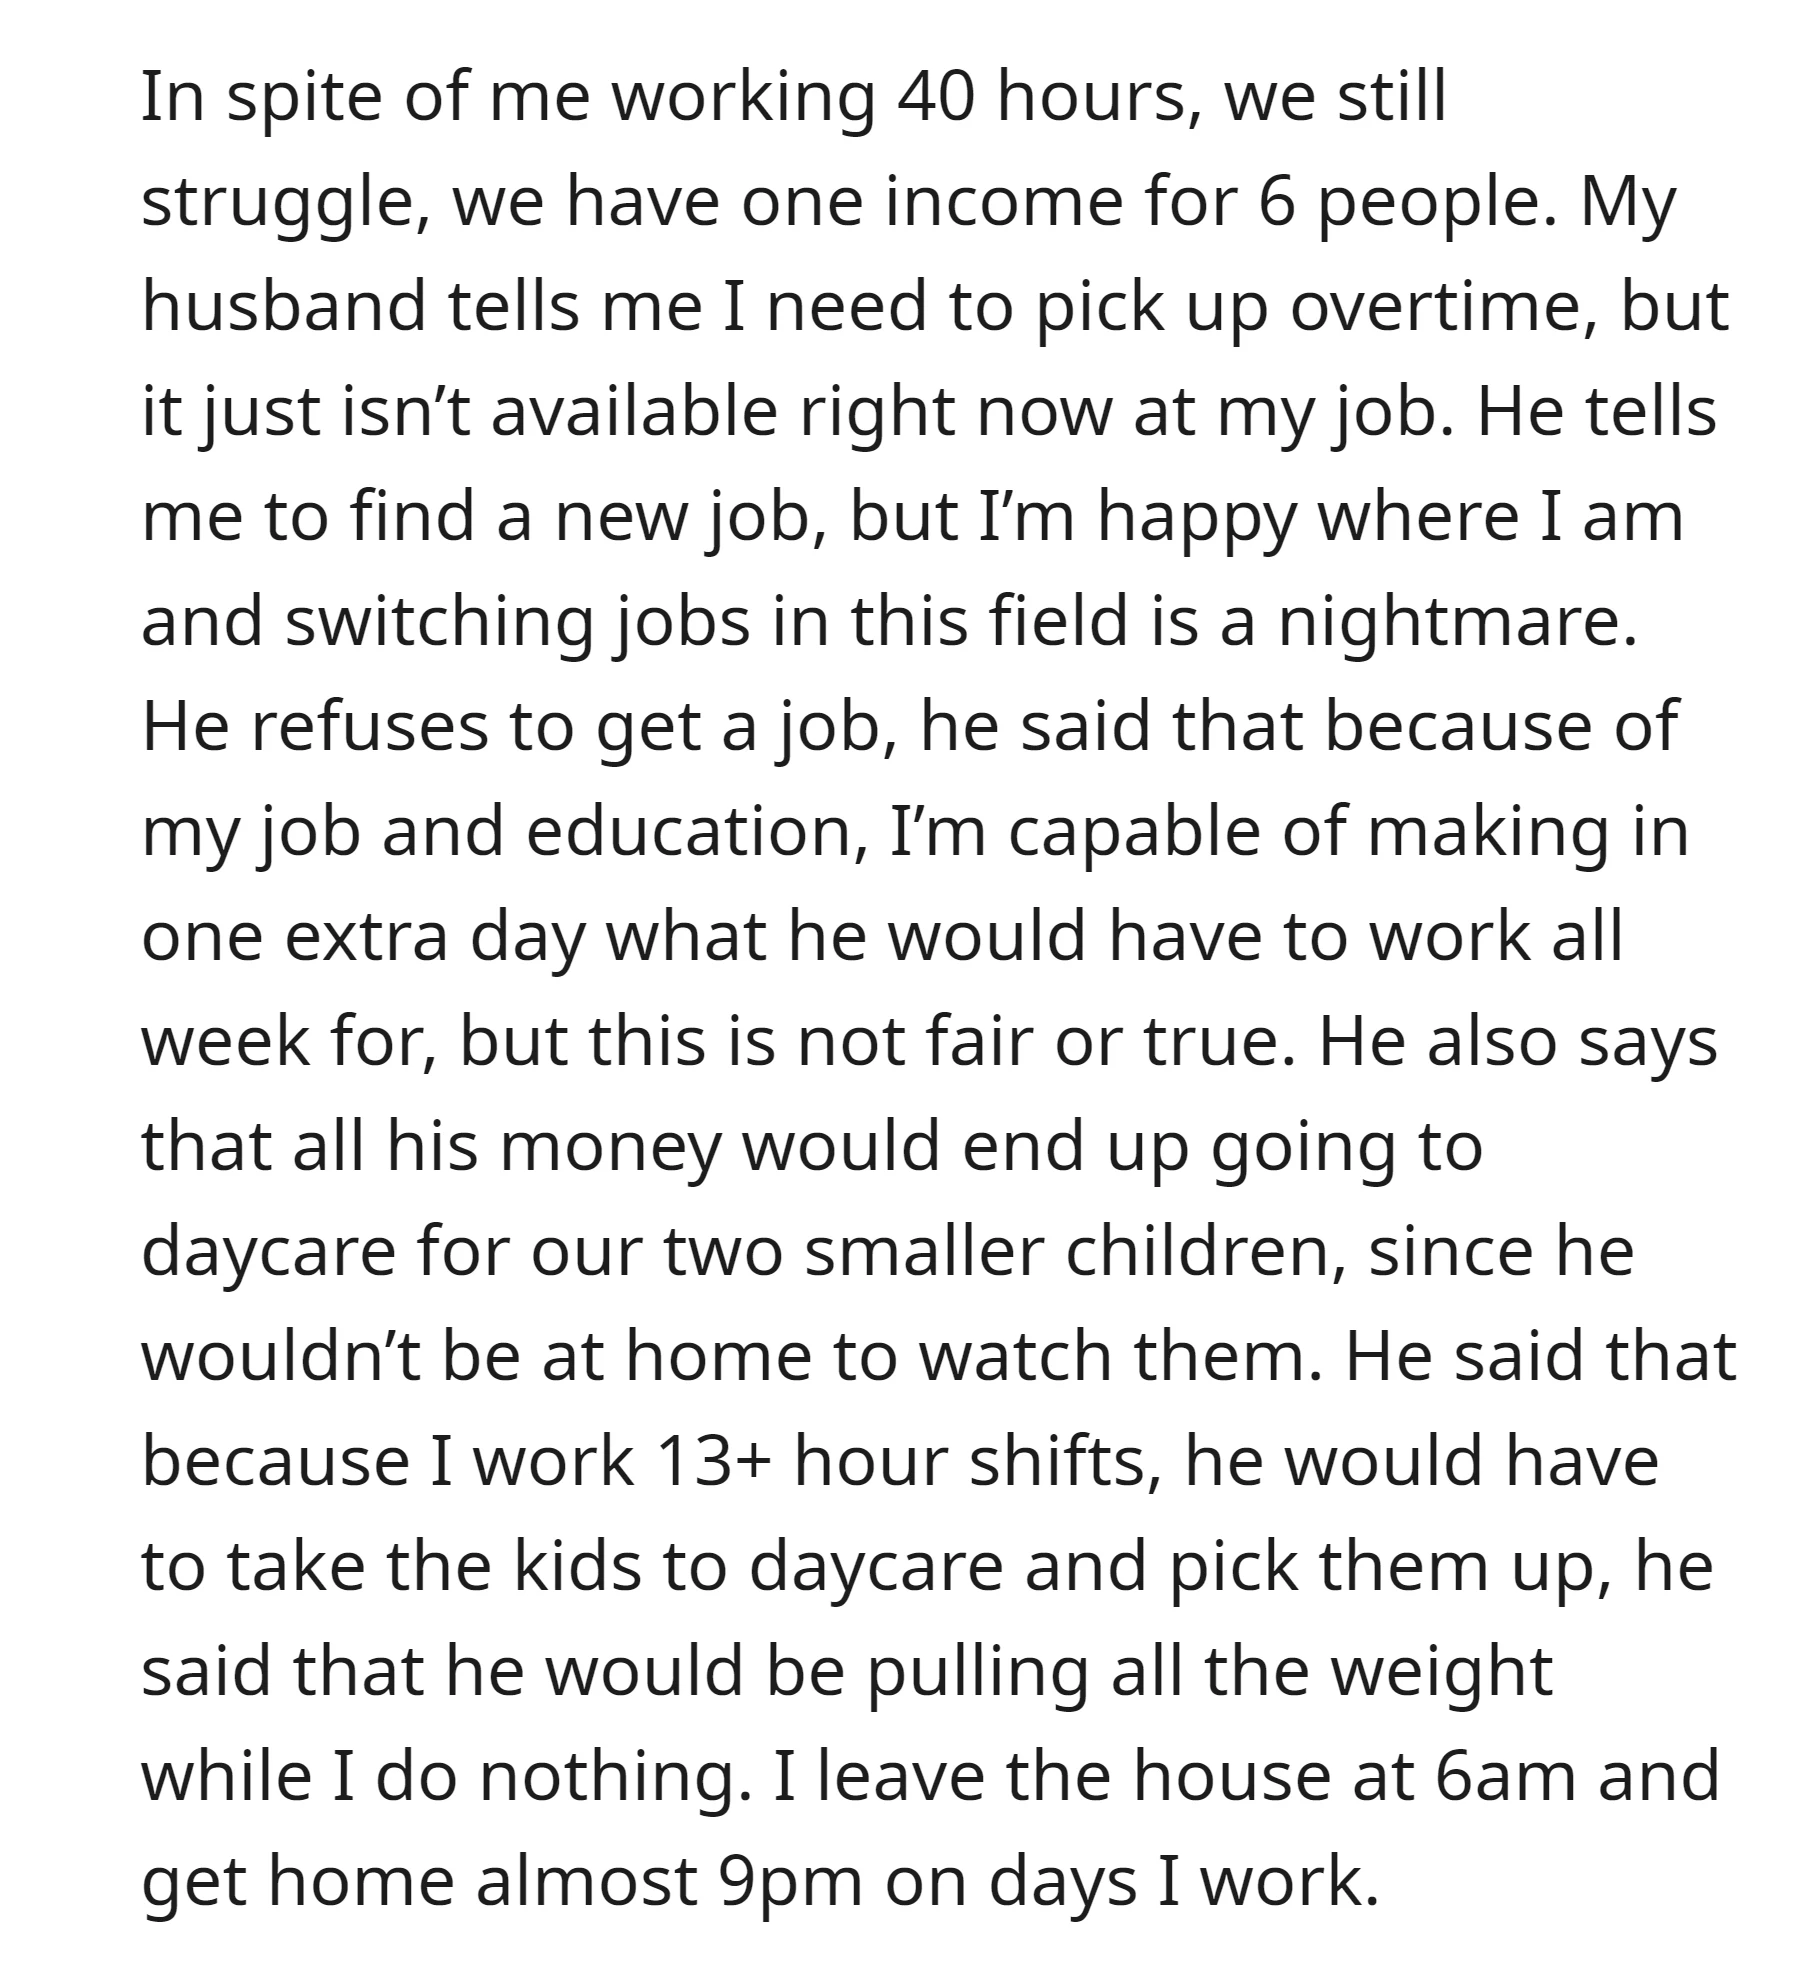 Her husband discouraged her from seeking overtime or a new job